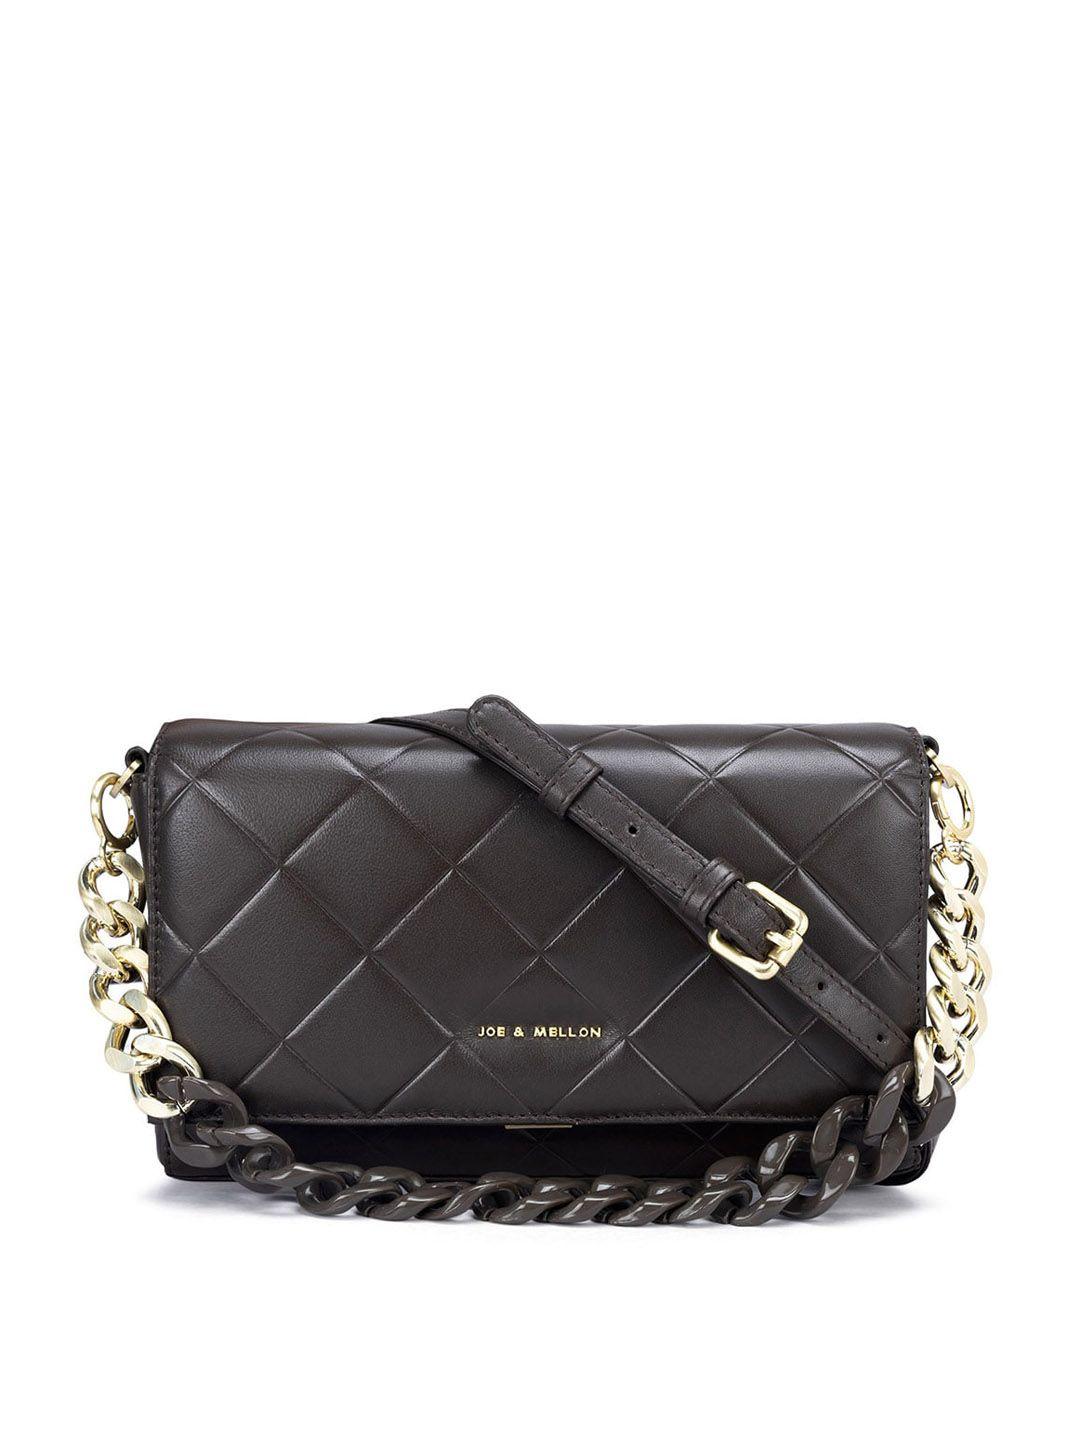 joe & mellon textured leather structured sling bag